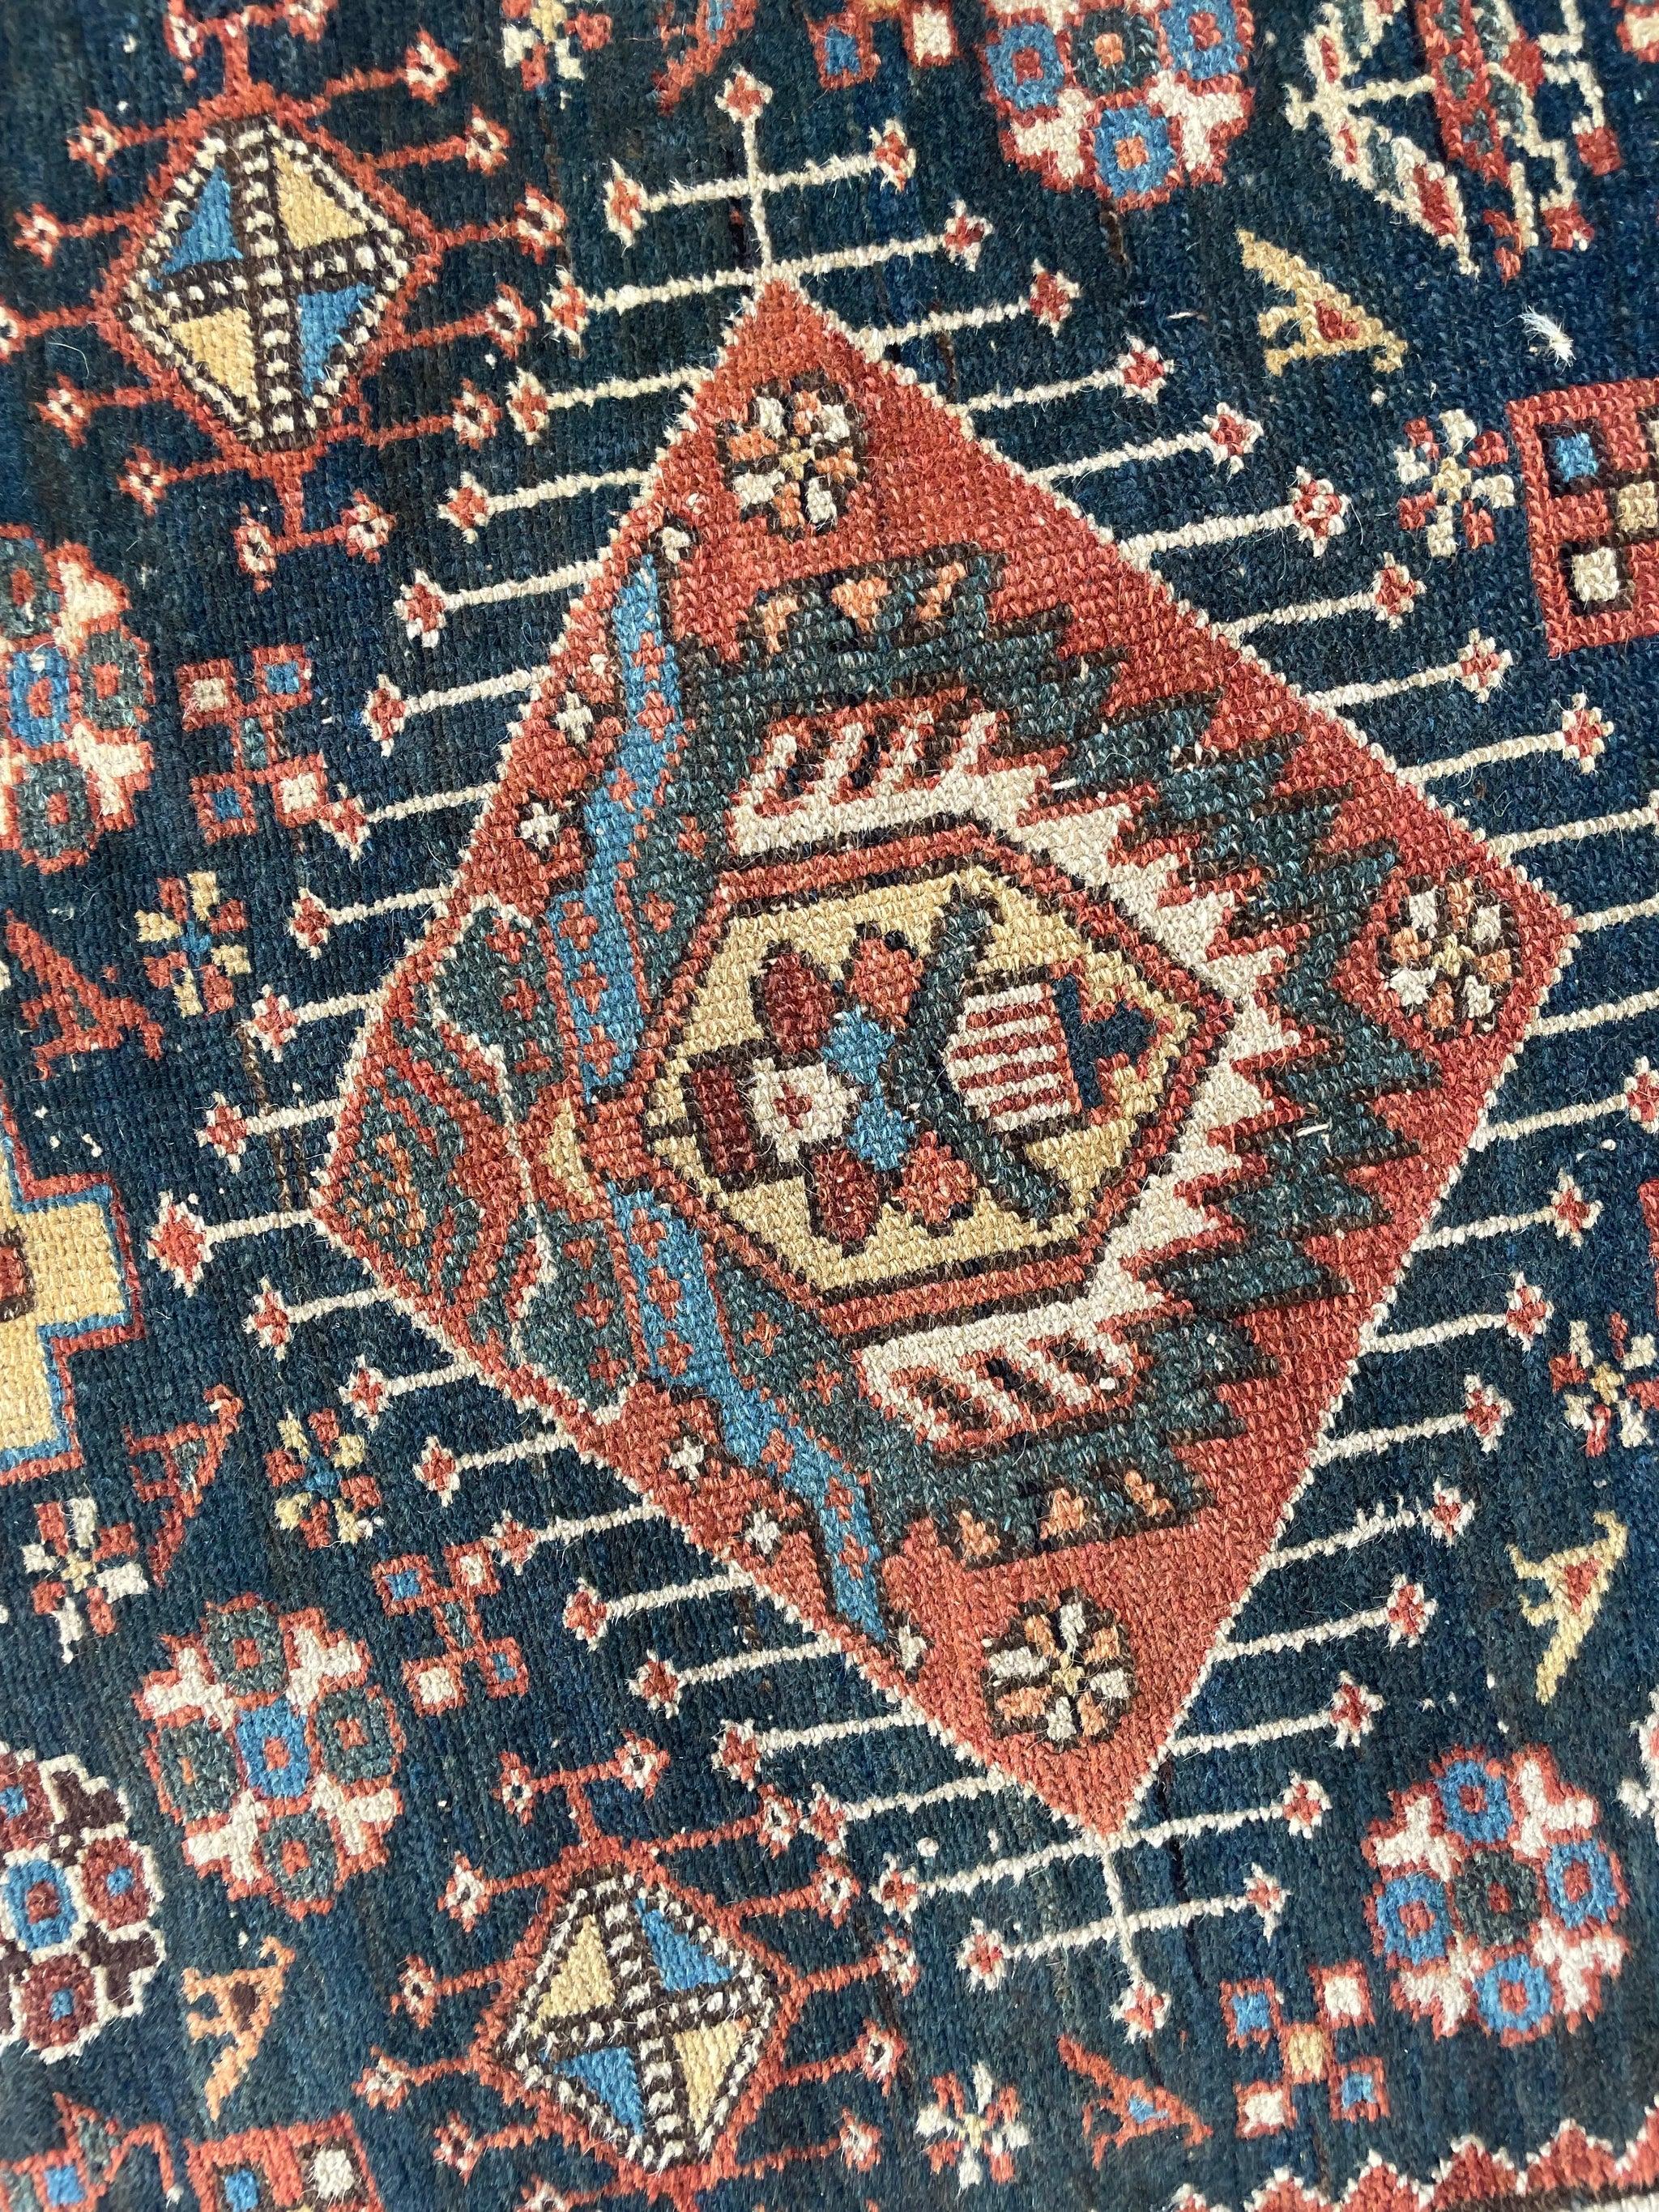 Ancient Nomadic Northwest Persian Karaja Runner  Super Fine Piece In Indigo, Clay, Forest Green

Size:  3.2 x 13.5
Age:  Antique, C. 1920's
Pile: Incredible age-related wear patina

This rug is one-of-a-kind, only one in the world, no others are